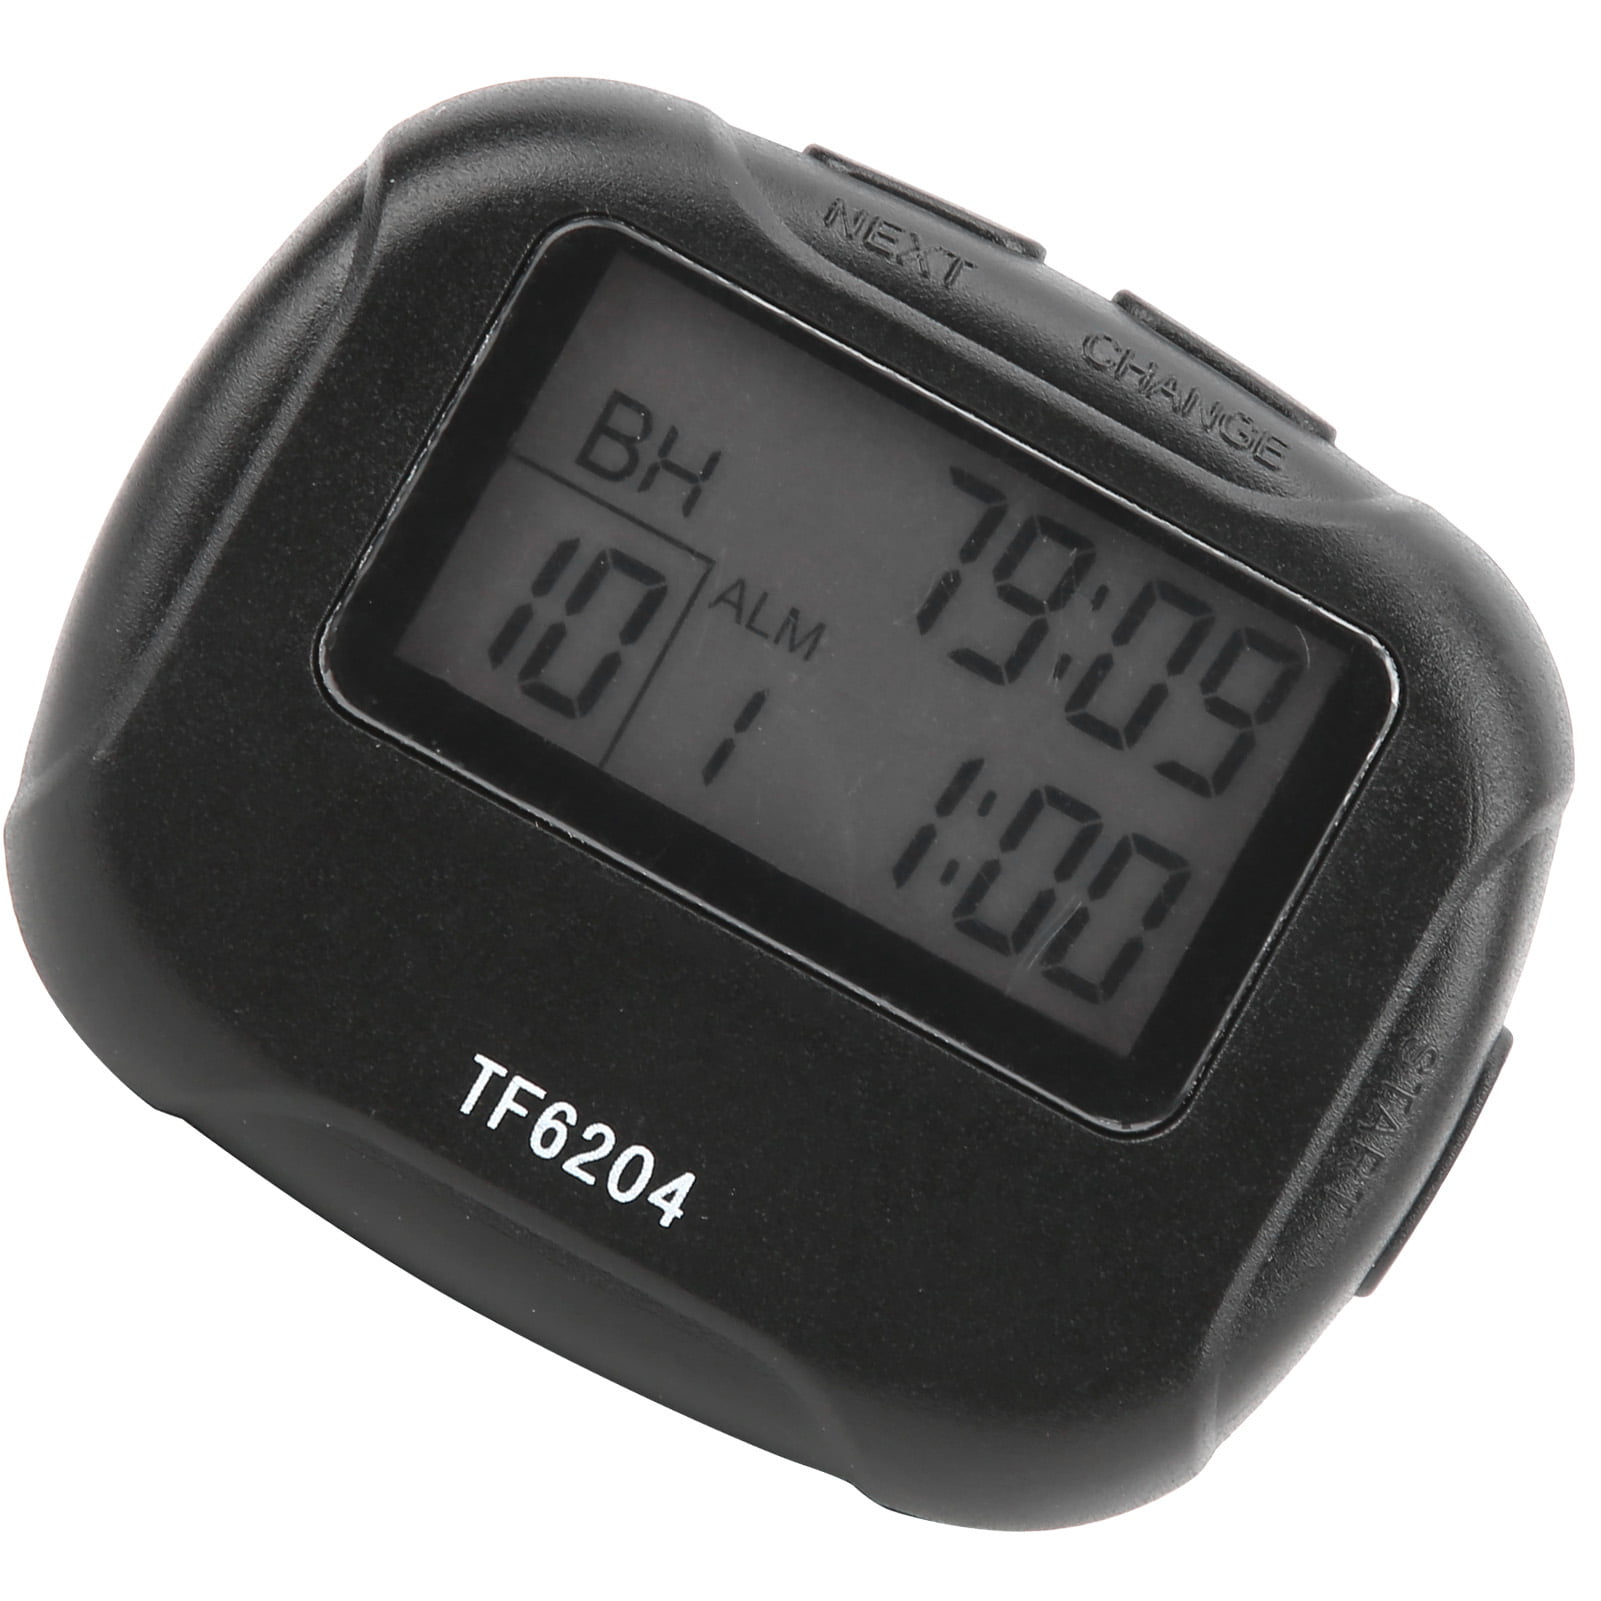 Training Electronics Interval Timer Sports Crossfit Boxing Segment Stopwatch 